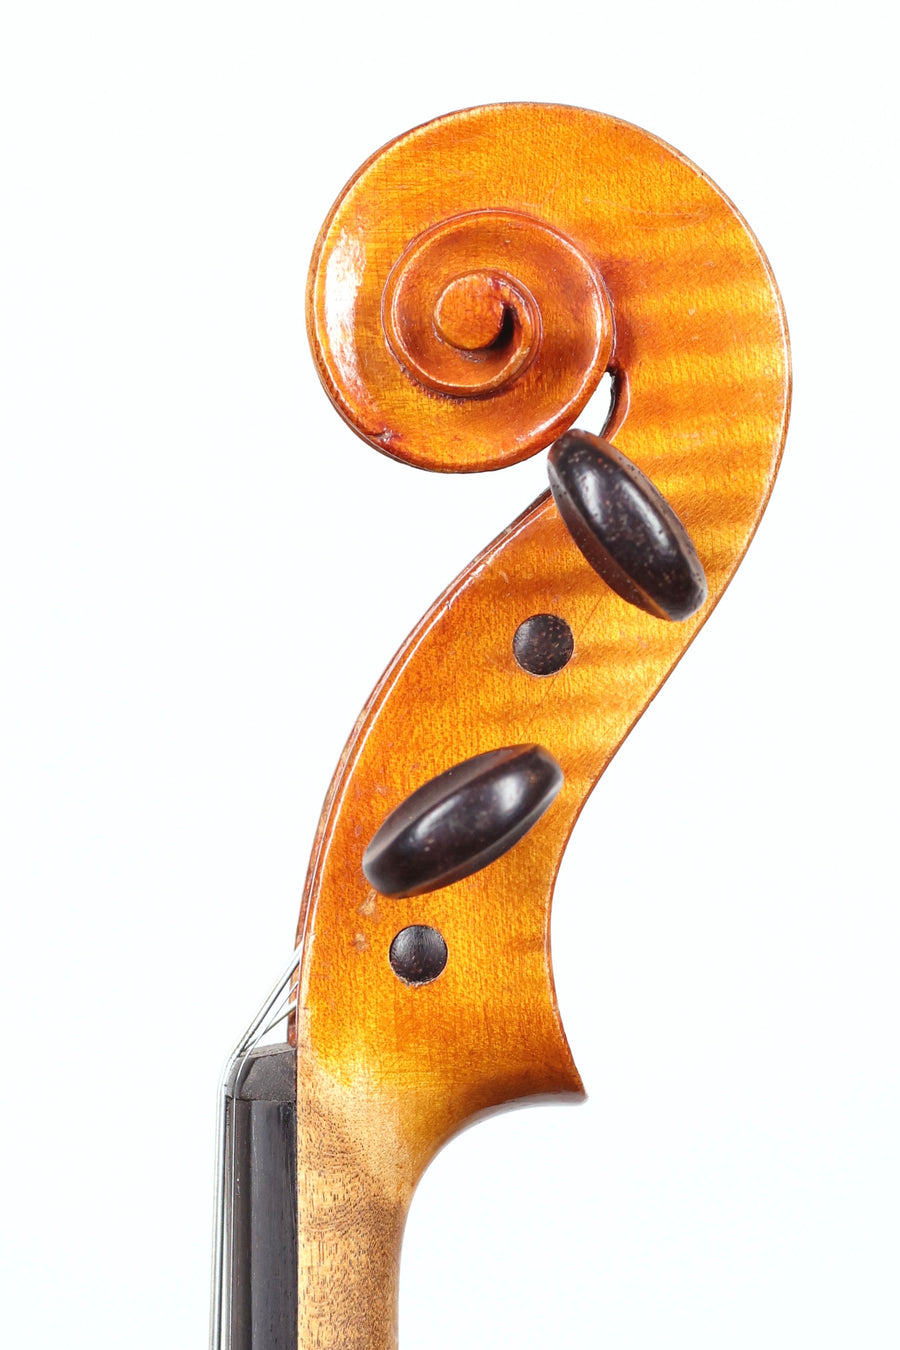 A Beautiful French Violin After Vuillaume From Laberte And For Chapuis.